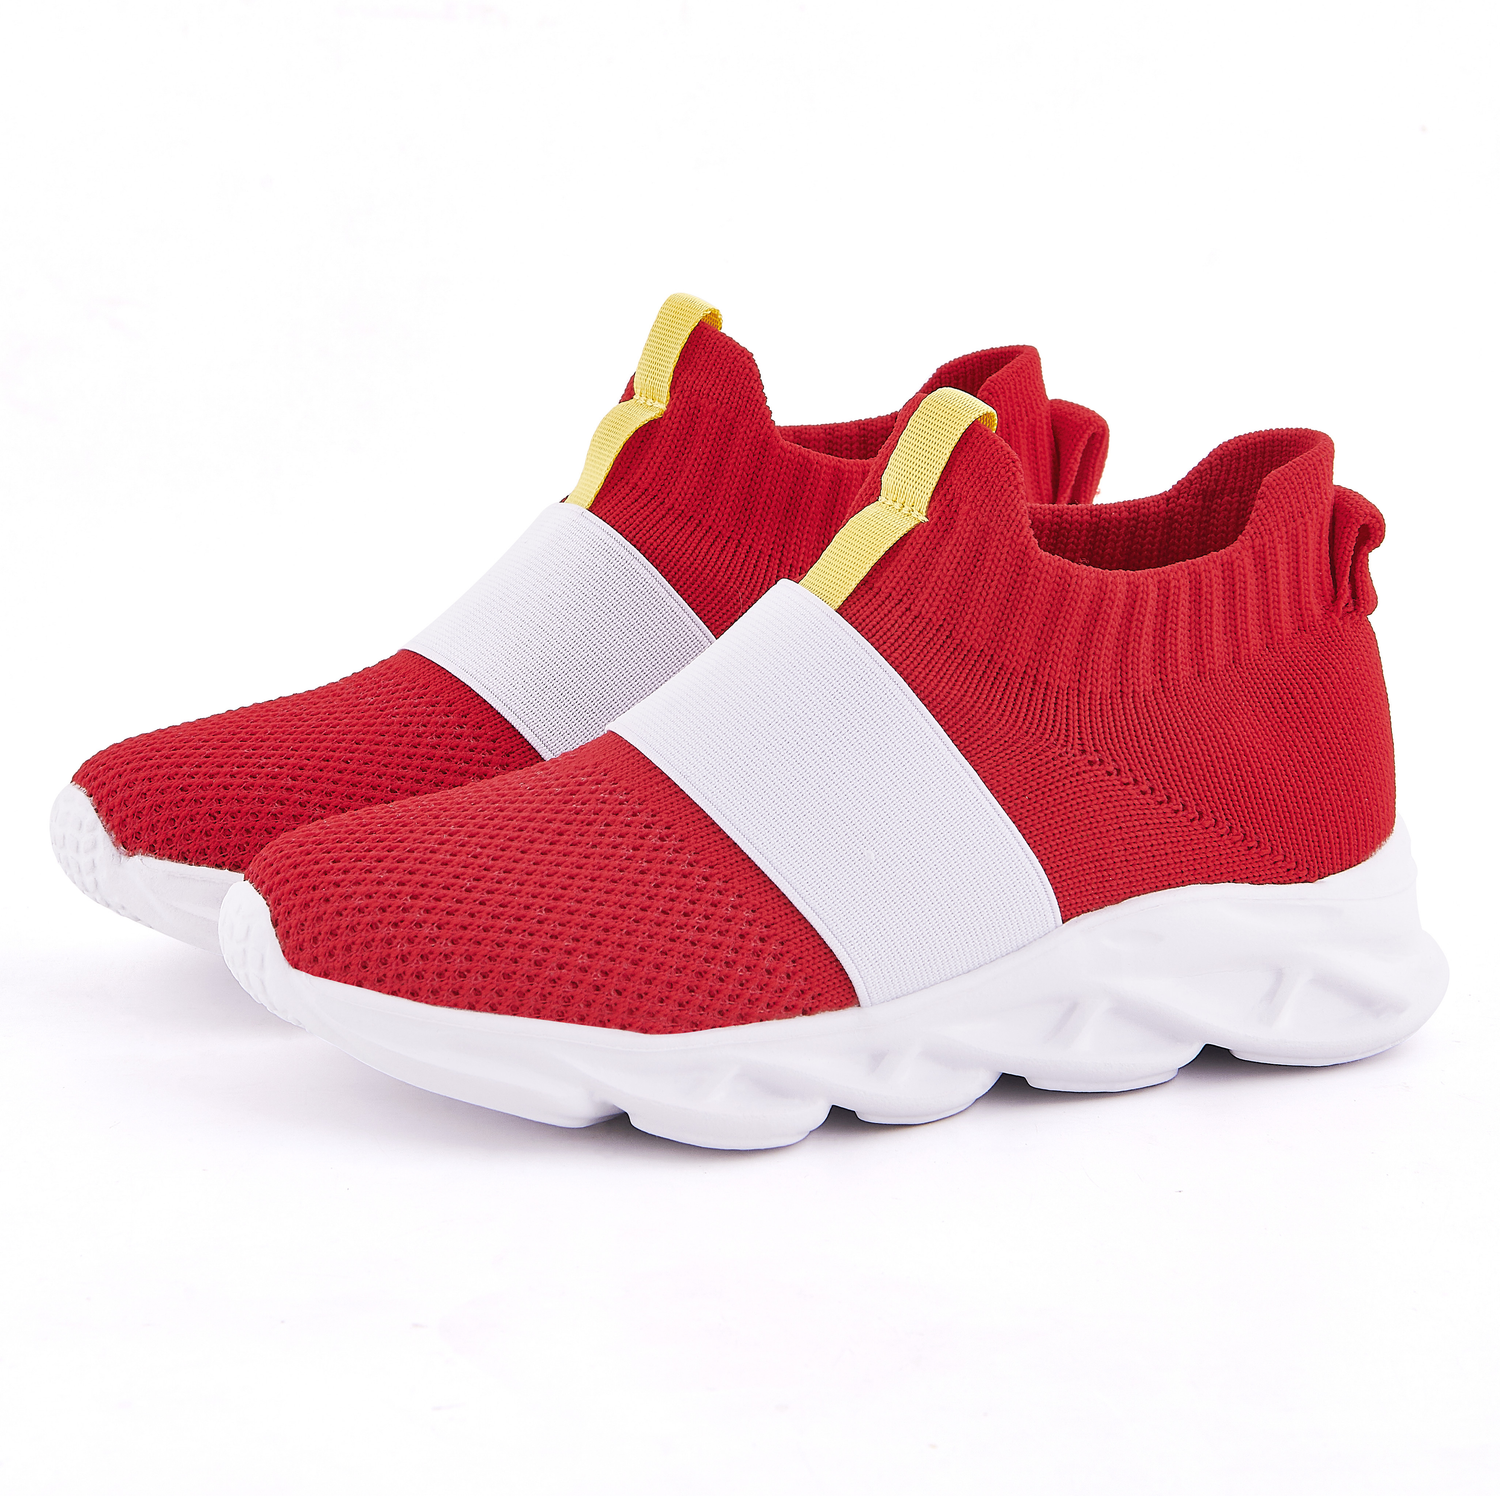 Sonic Shoes -Red Sonic Sneakers For Kids Boys Girls- Start From $25